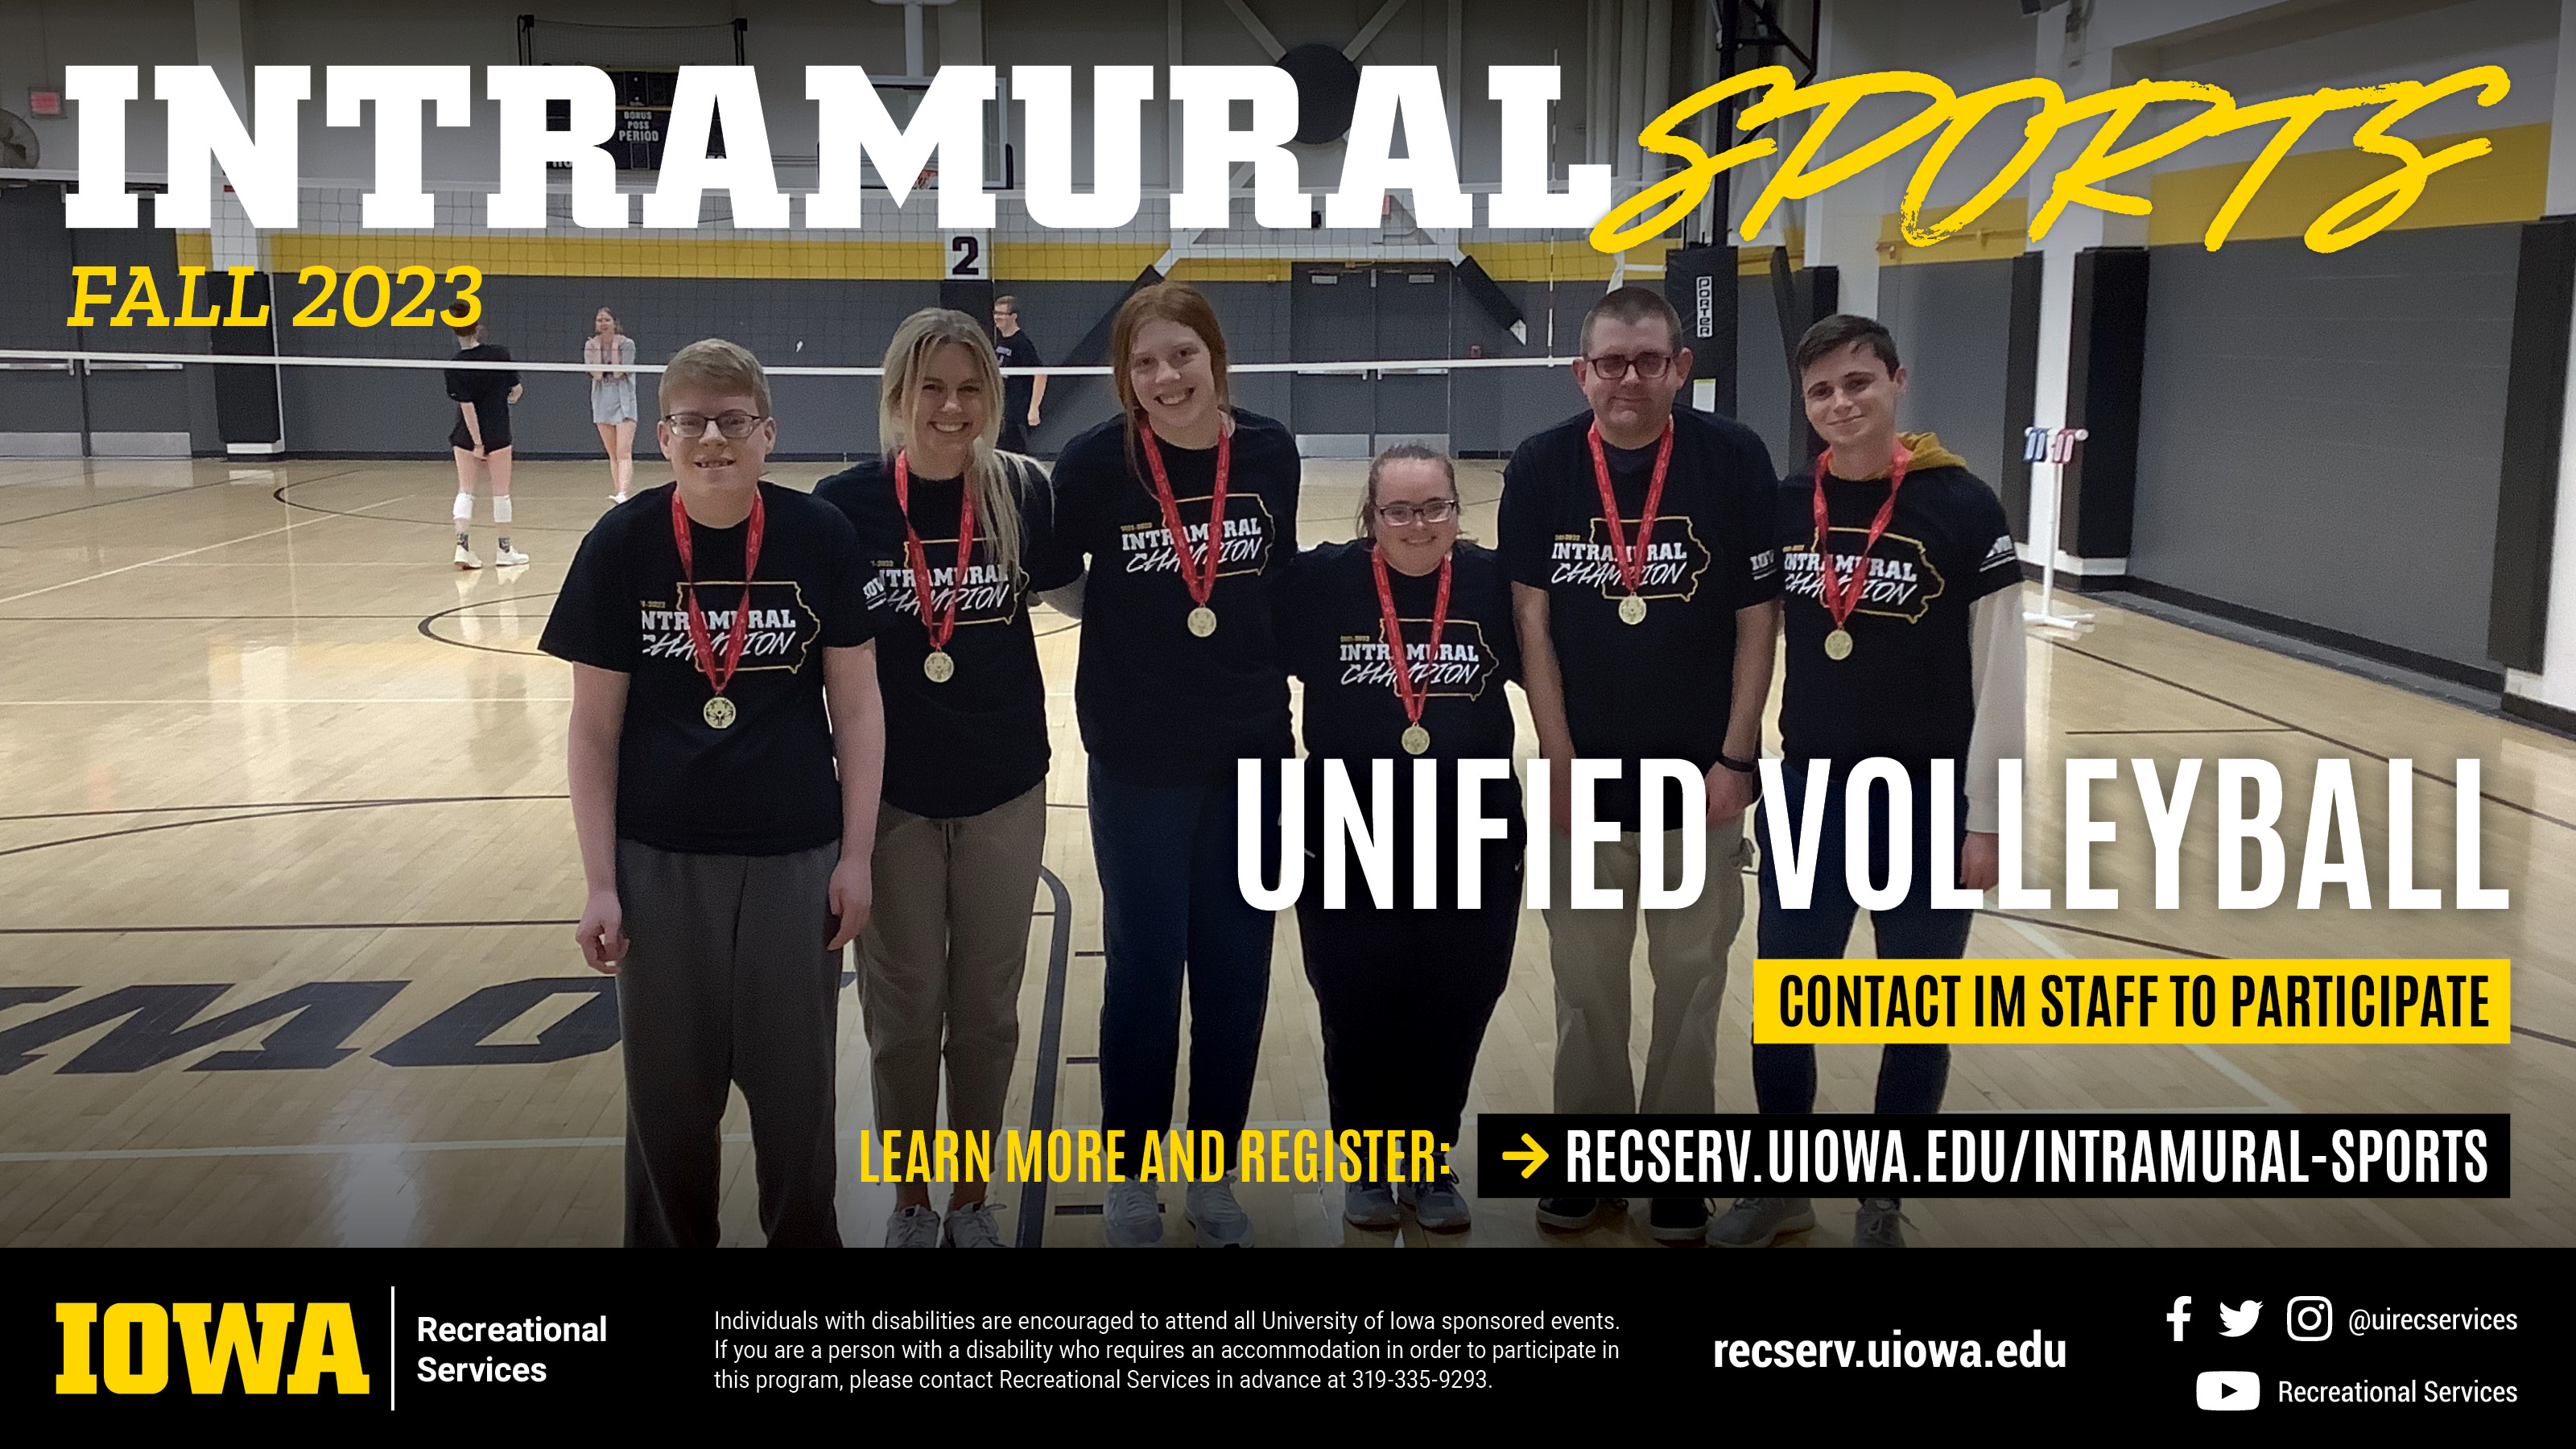 Unified volleyball registration contact IM STAFF